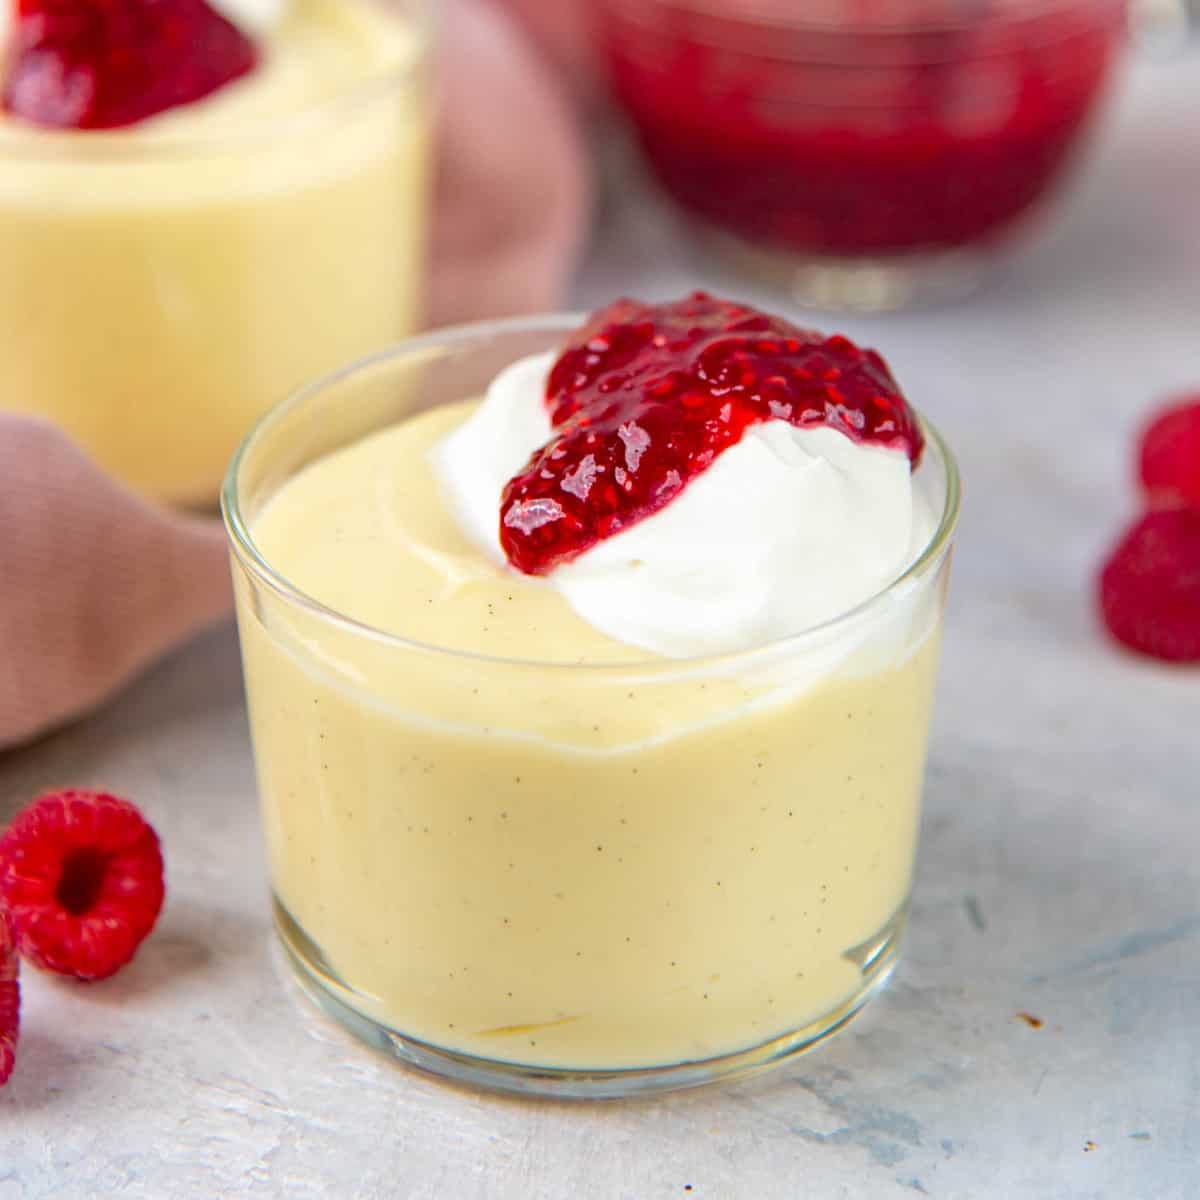 It’s no secret that dessert can be a quick route to happiness, and the 10 servings of vanilla pudding in your emergency food supply will be no exception